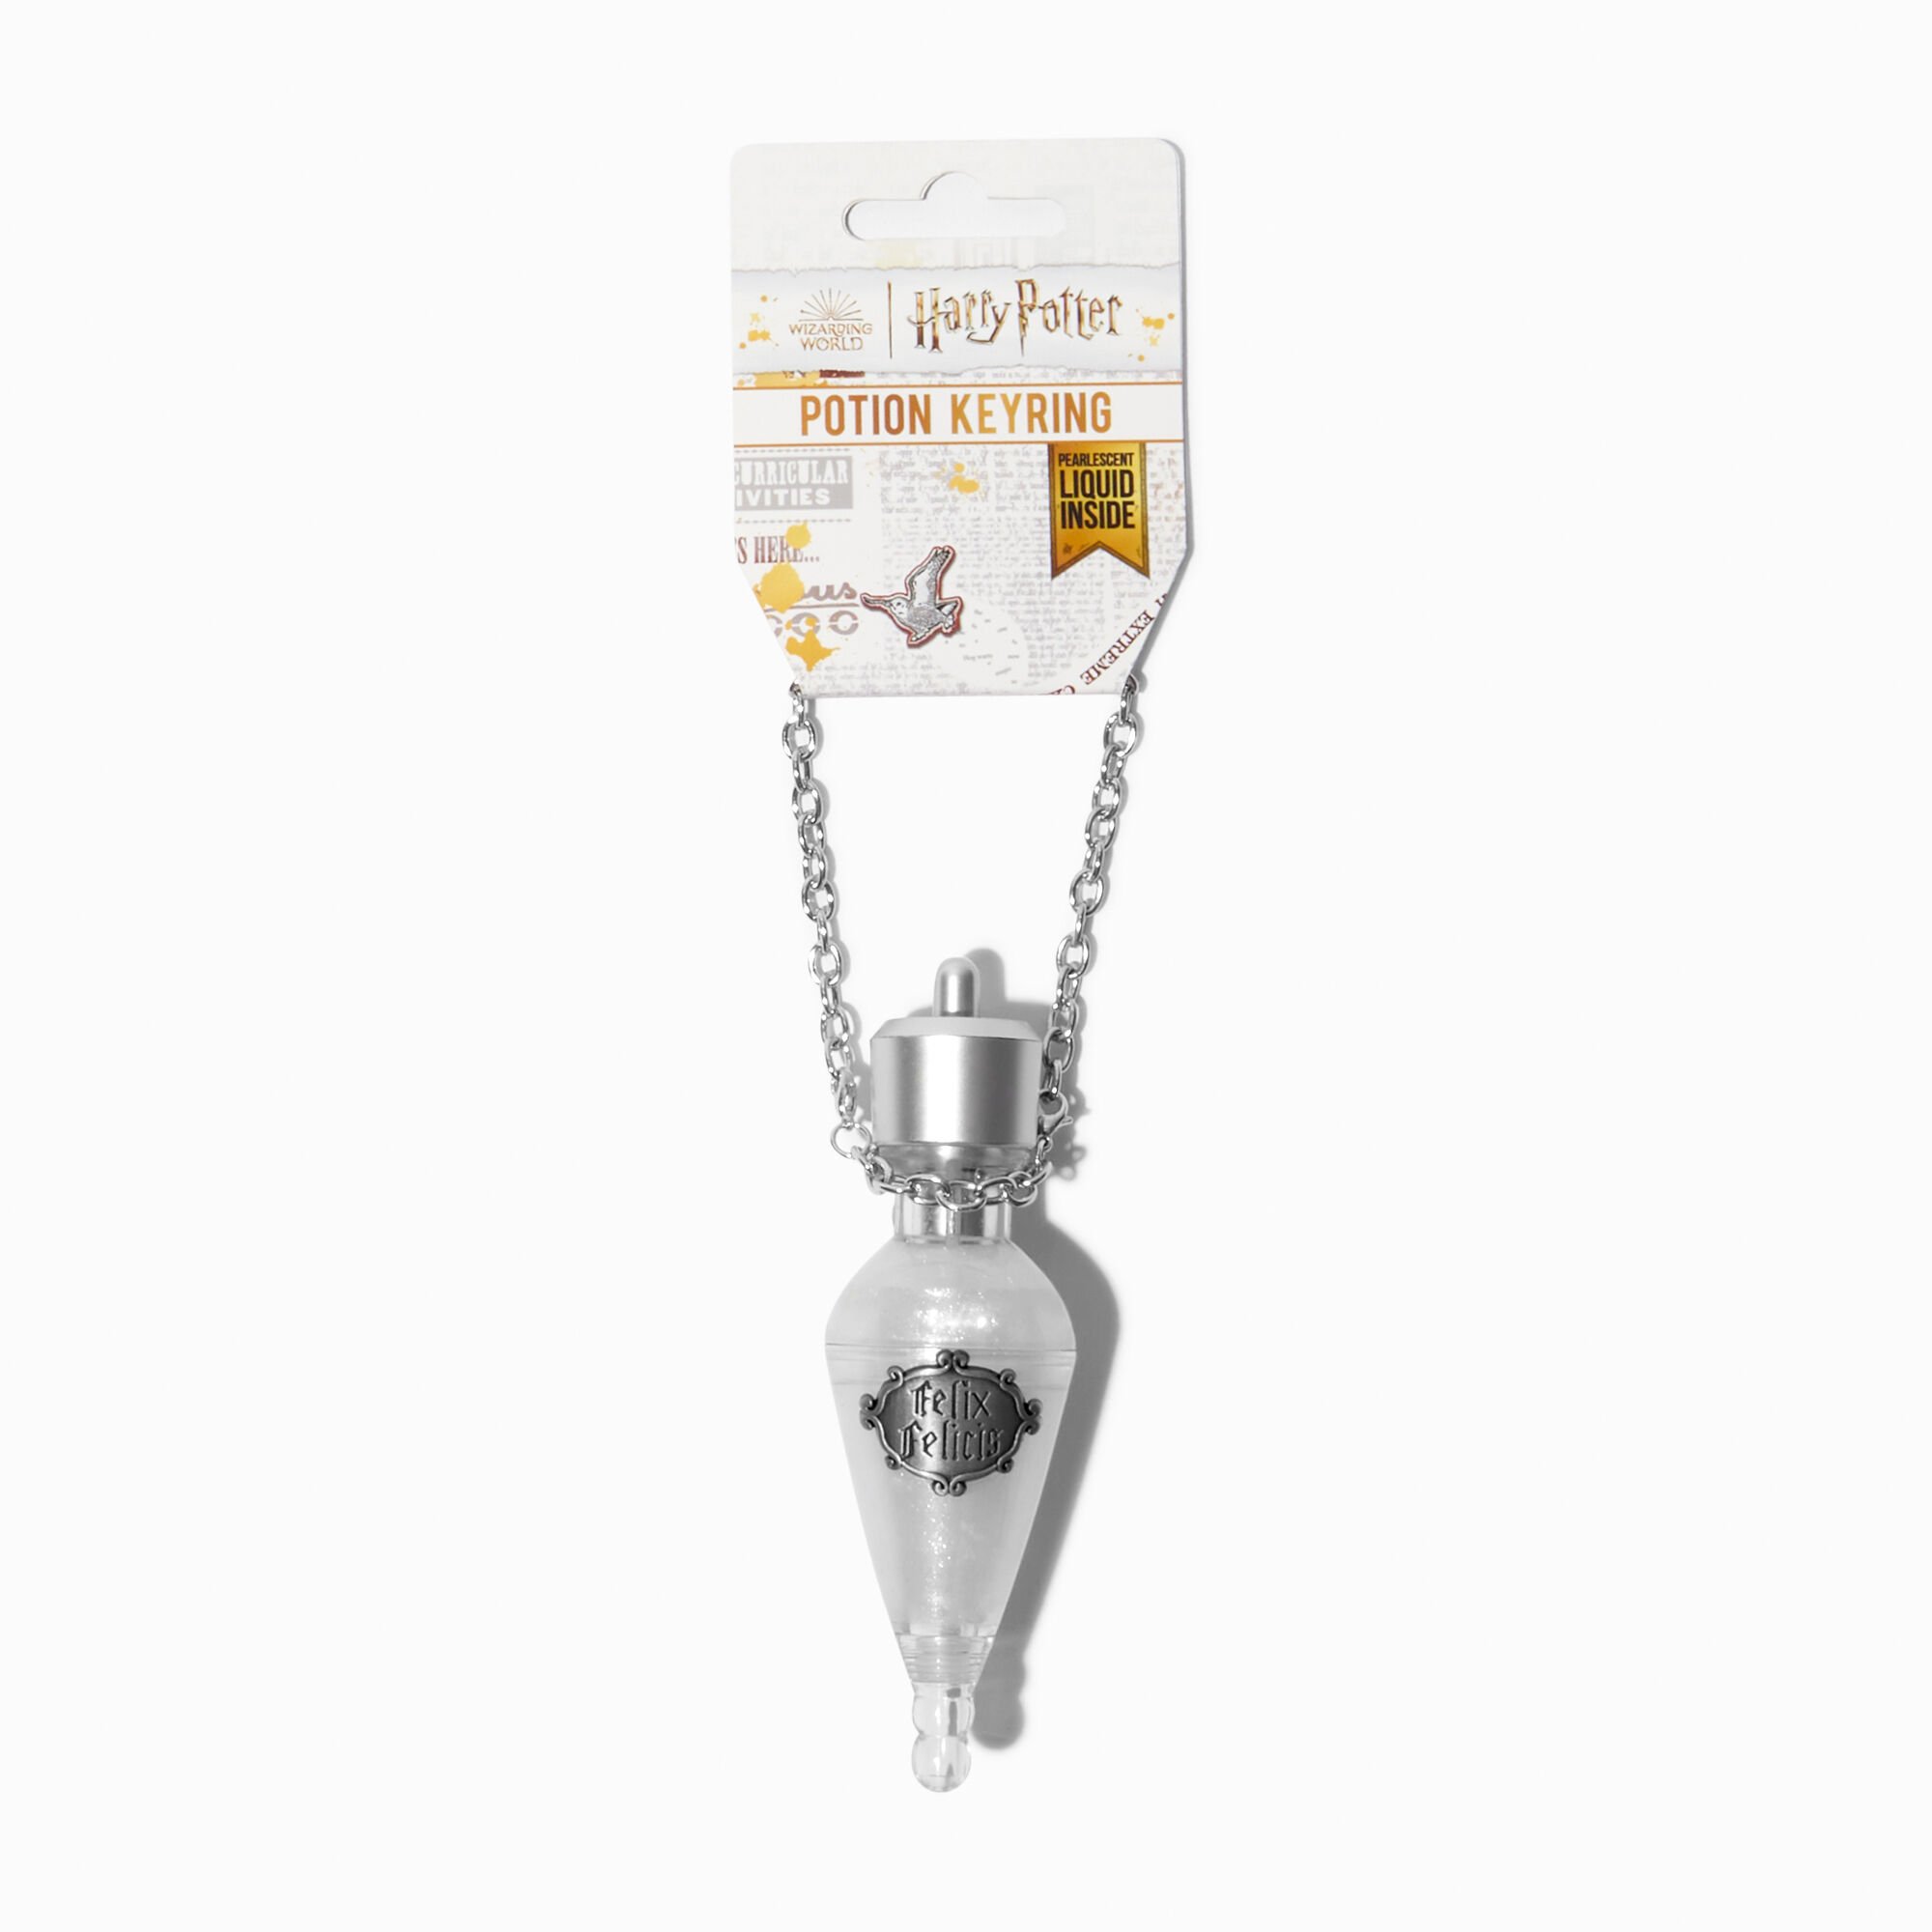 View Claires Harry Potter Felix Felicis Potion Keyring information